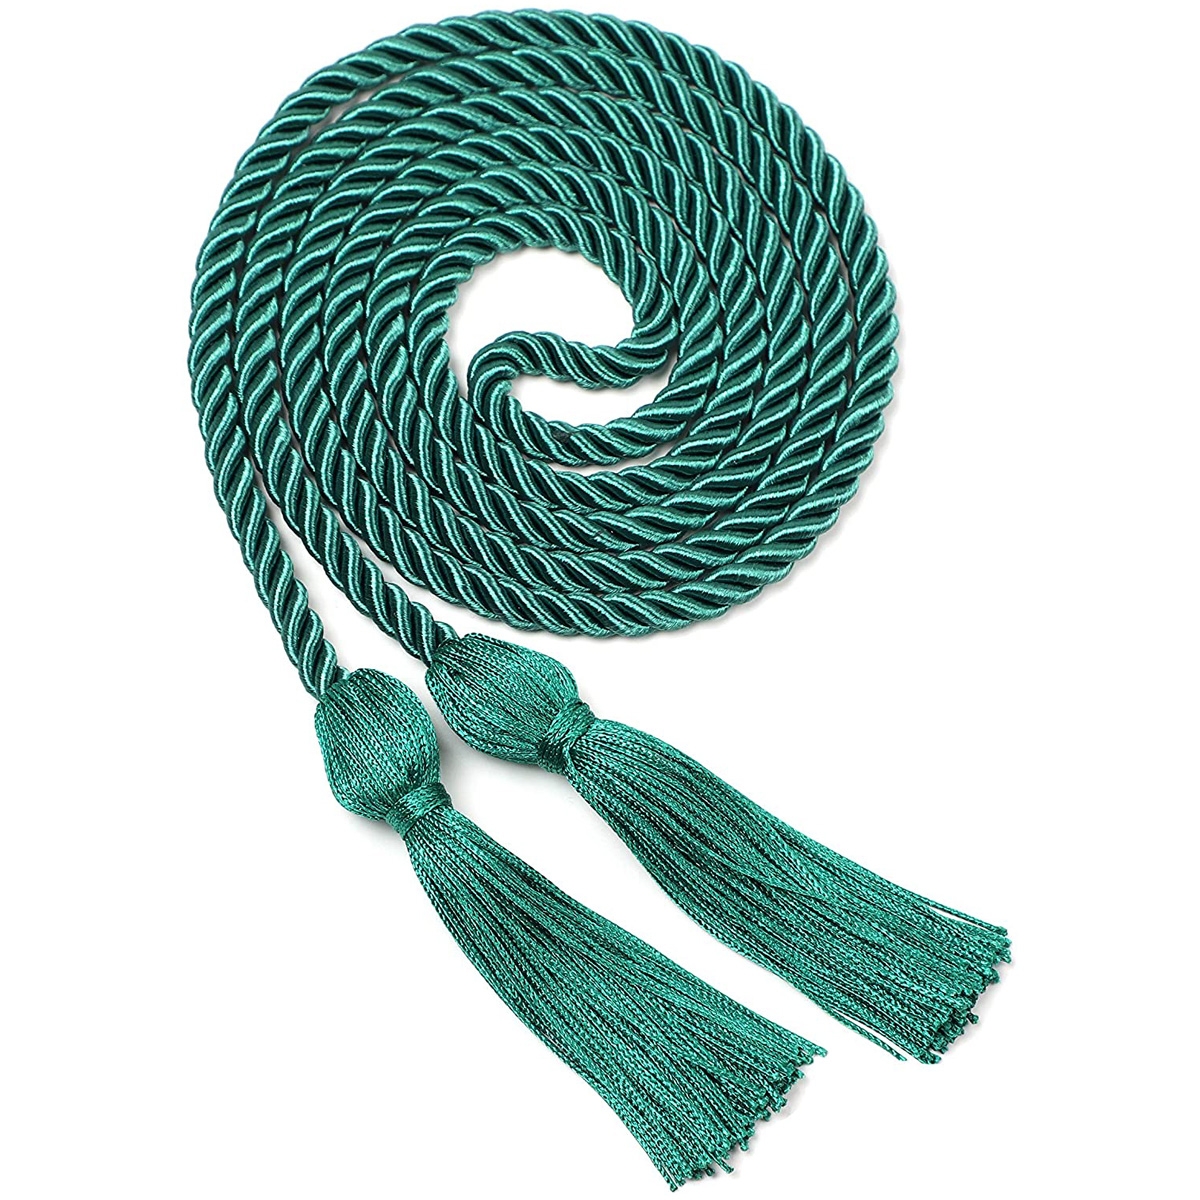 Cords Tassels Cords Polyester Yarn Honor Cord for Graduation Students 63 Inchs Long (Green)